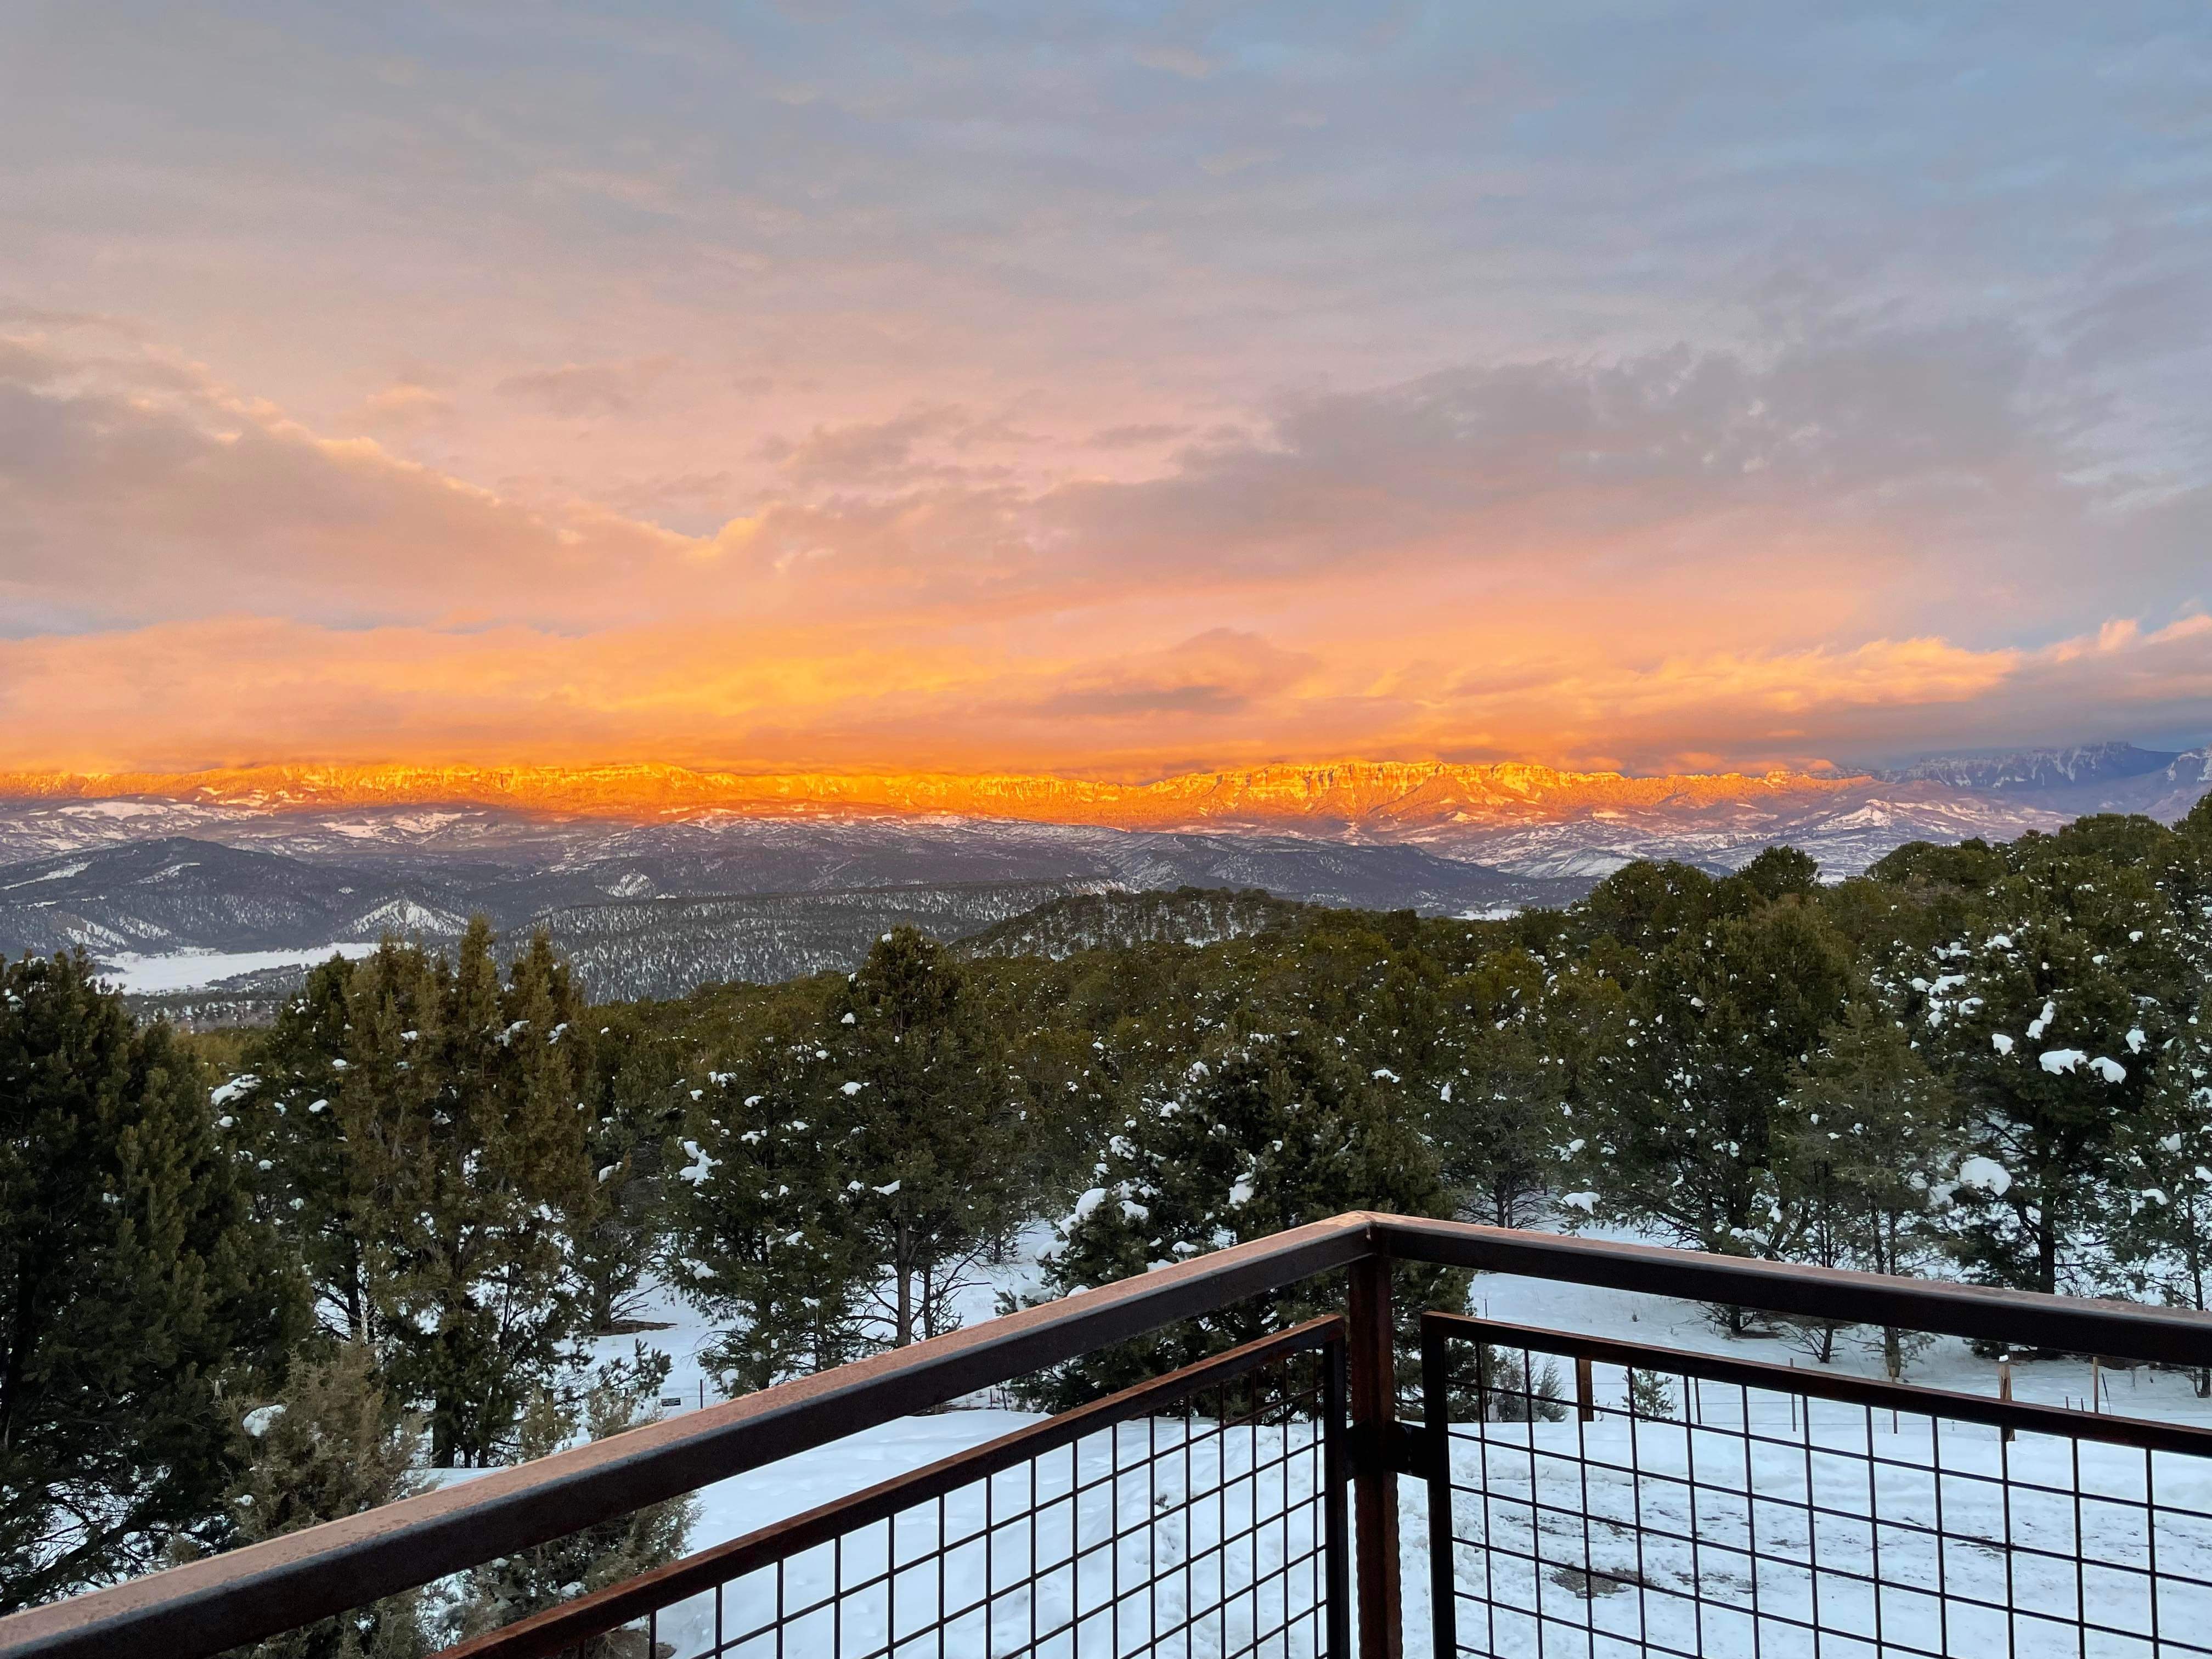 You can't beat the sunsets in western Colorado!